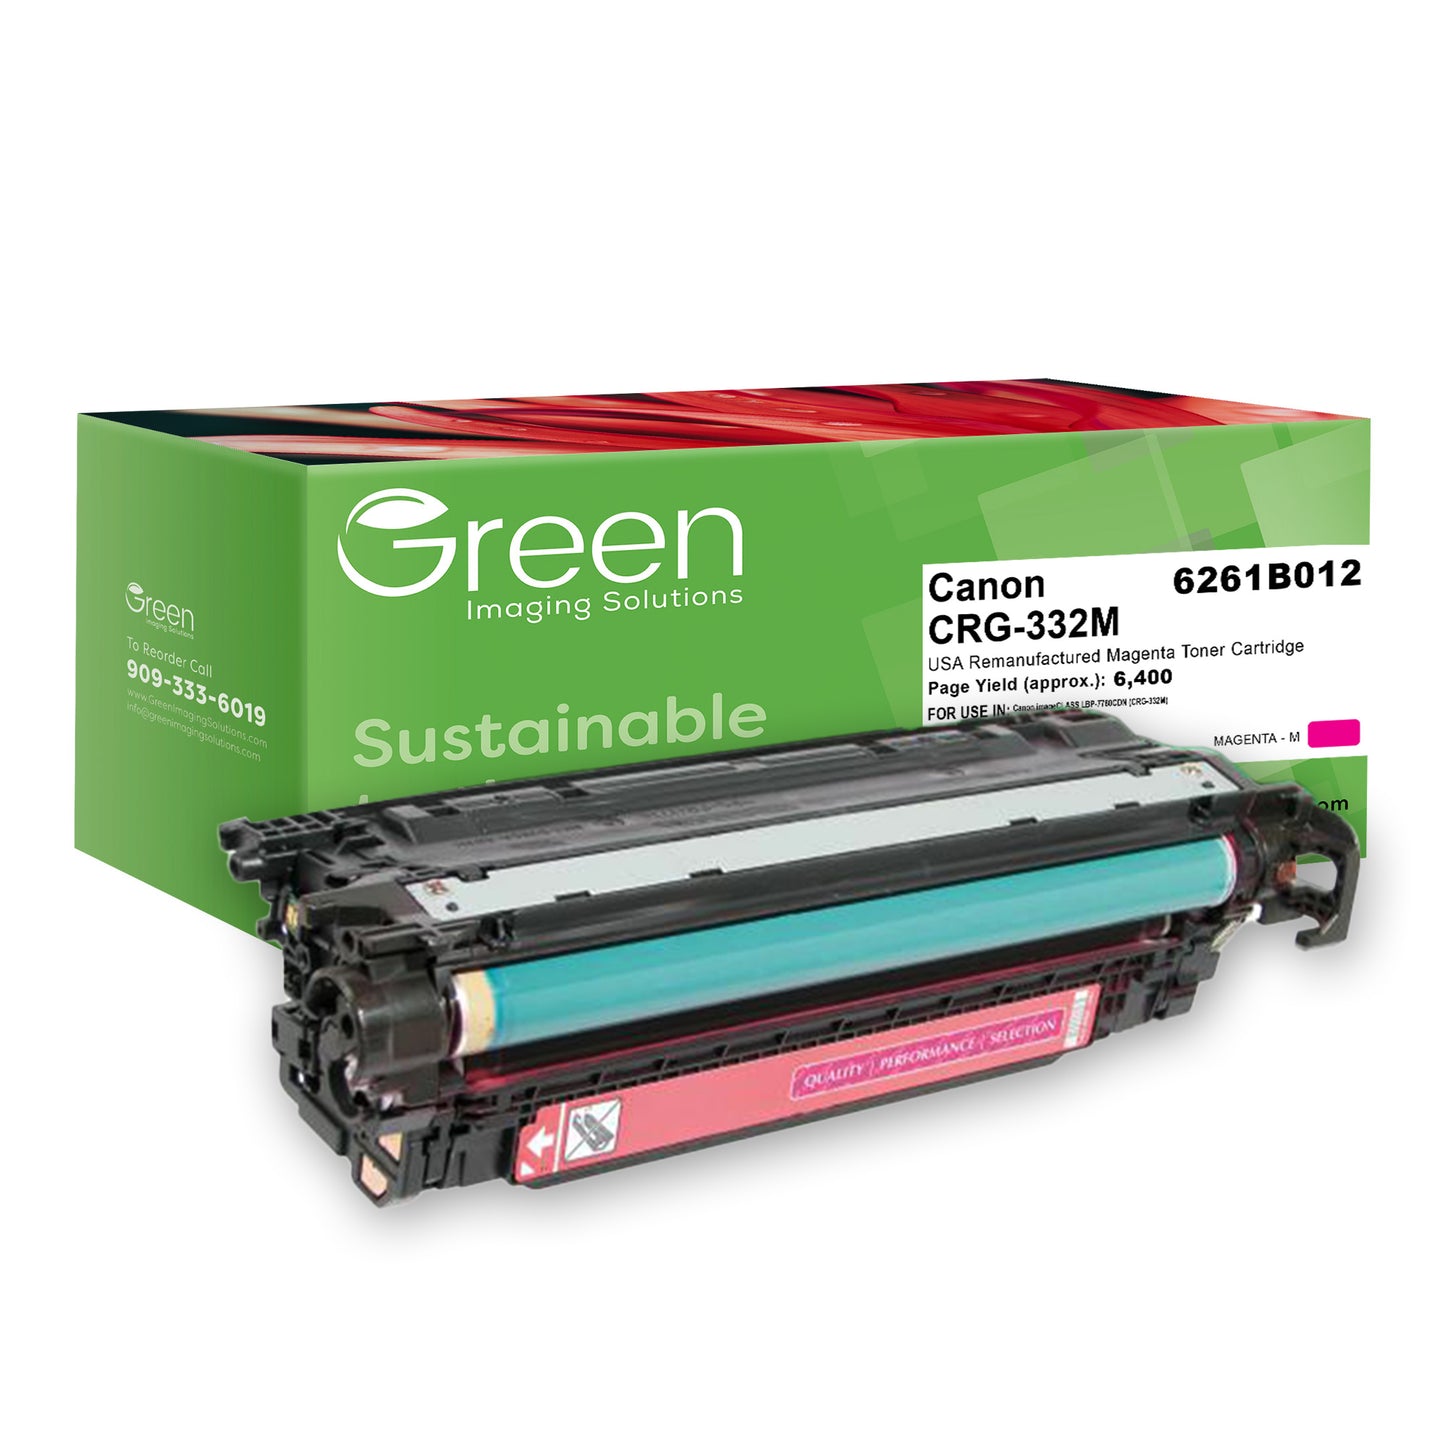 Green Imaging Solutions USA Remanufactured Magenta Toner Cartridge for Canon 6261B012 (CRG-332M)